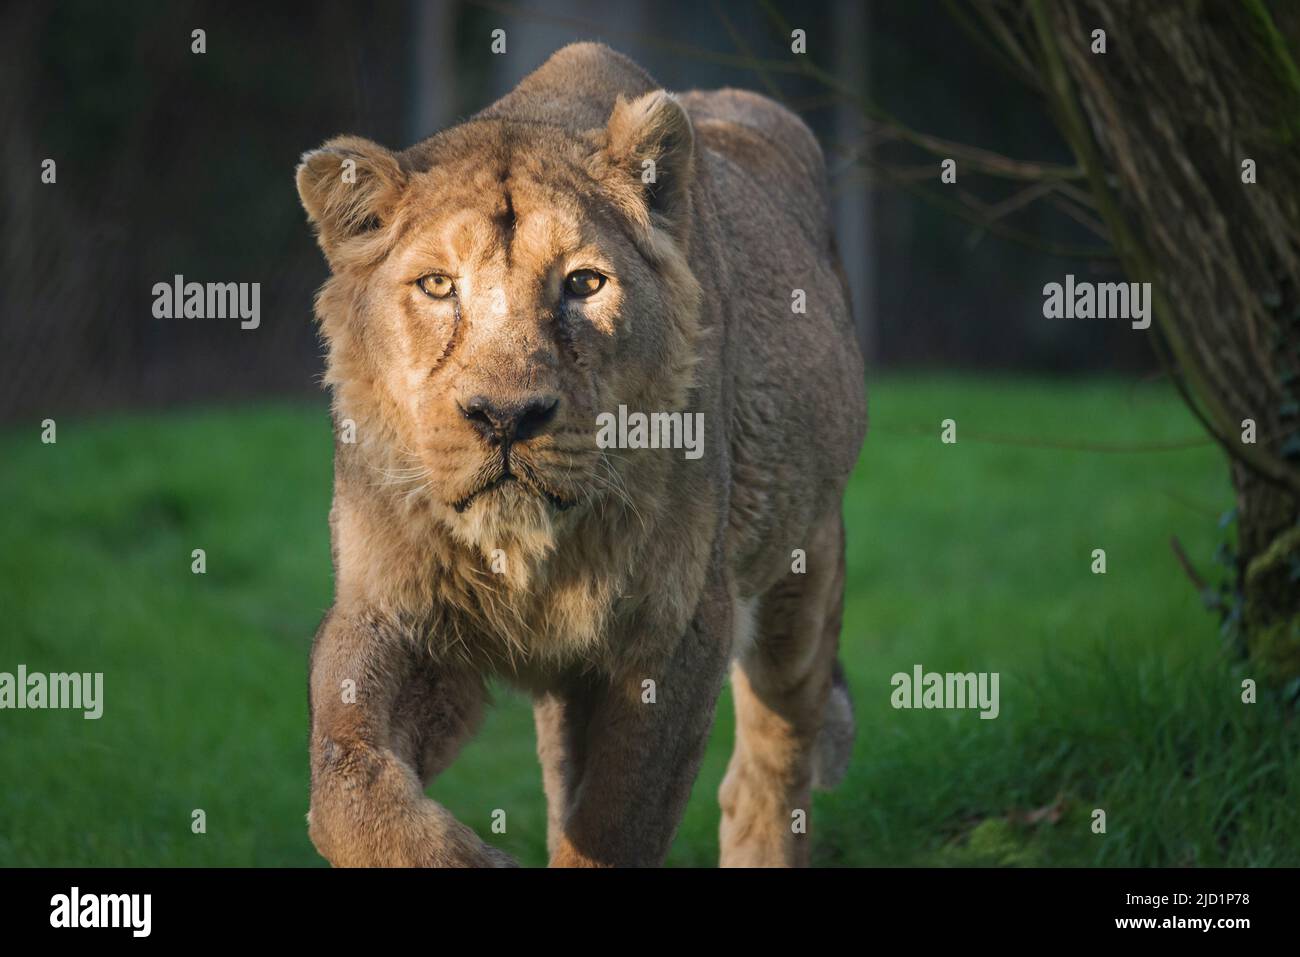 The Lioness of Asia, a pretty old lady. Beauty of nature. Conservation of species and in particular large carnivores. Animal protection. Stock Photo